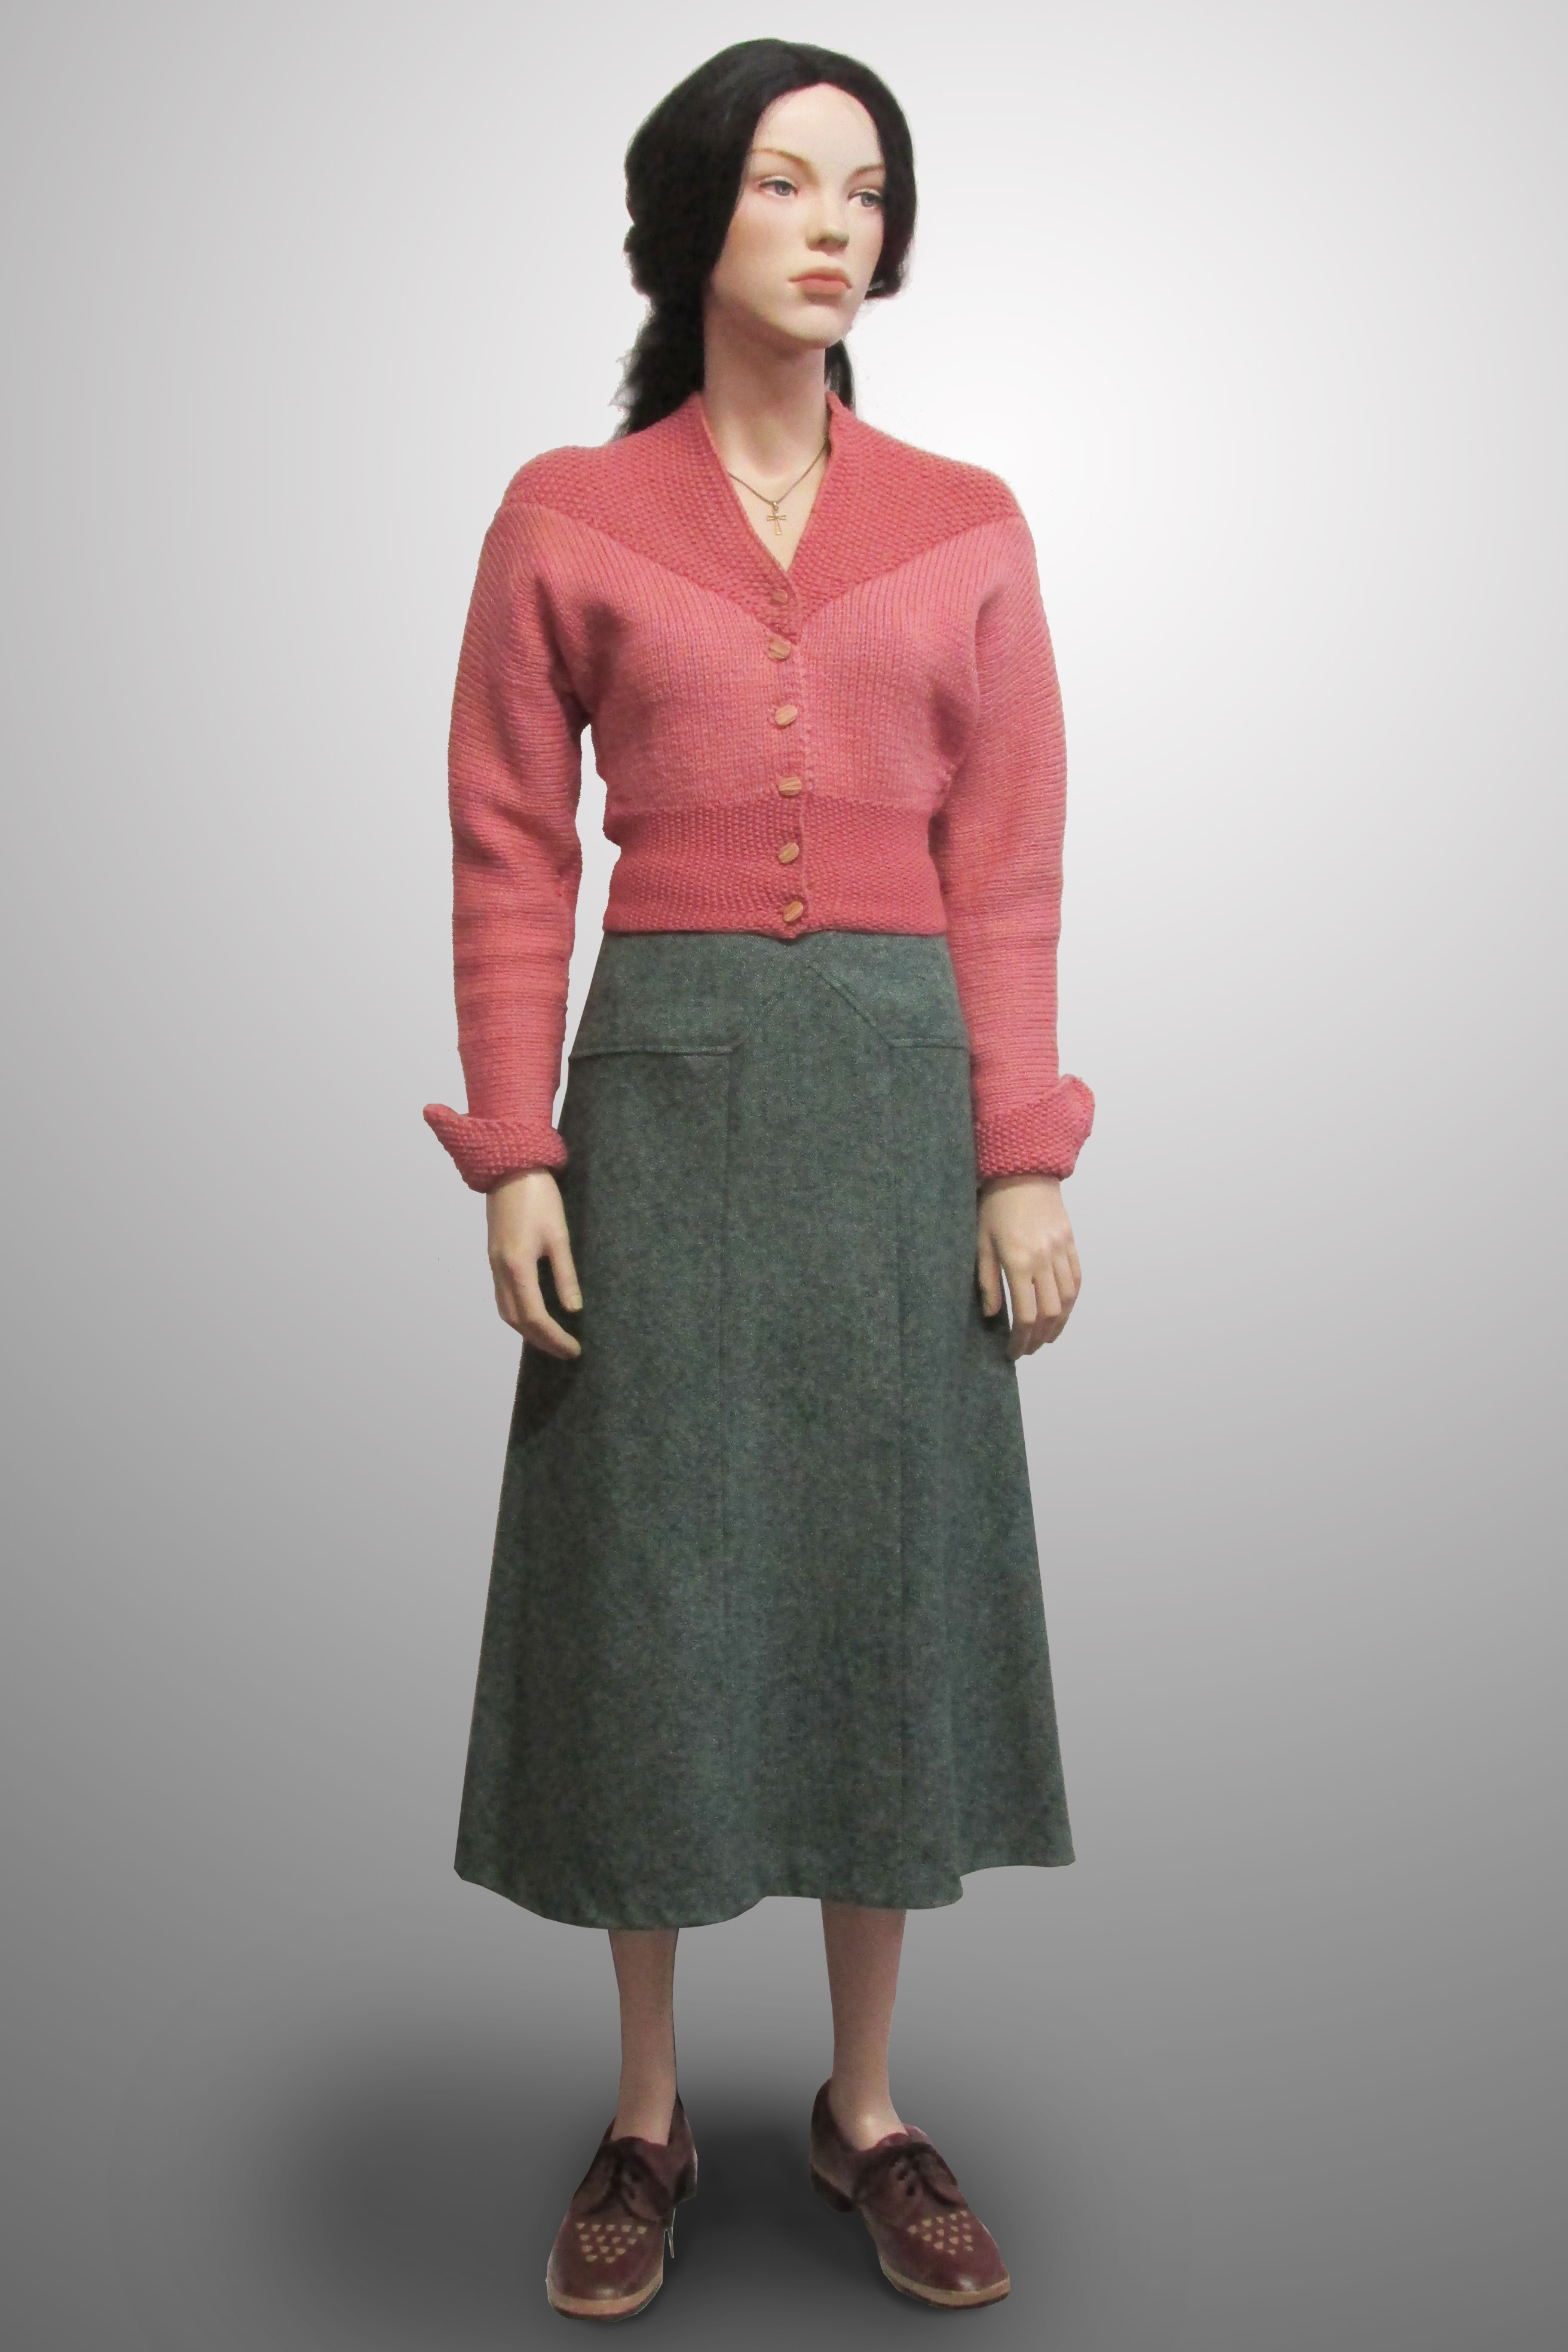 Pink Cardigan with Green Skirt 1940s/50s